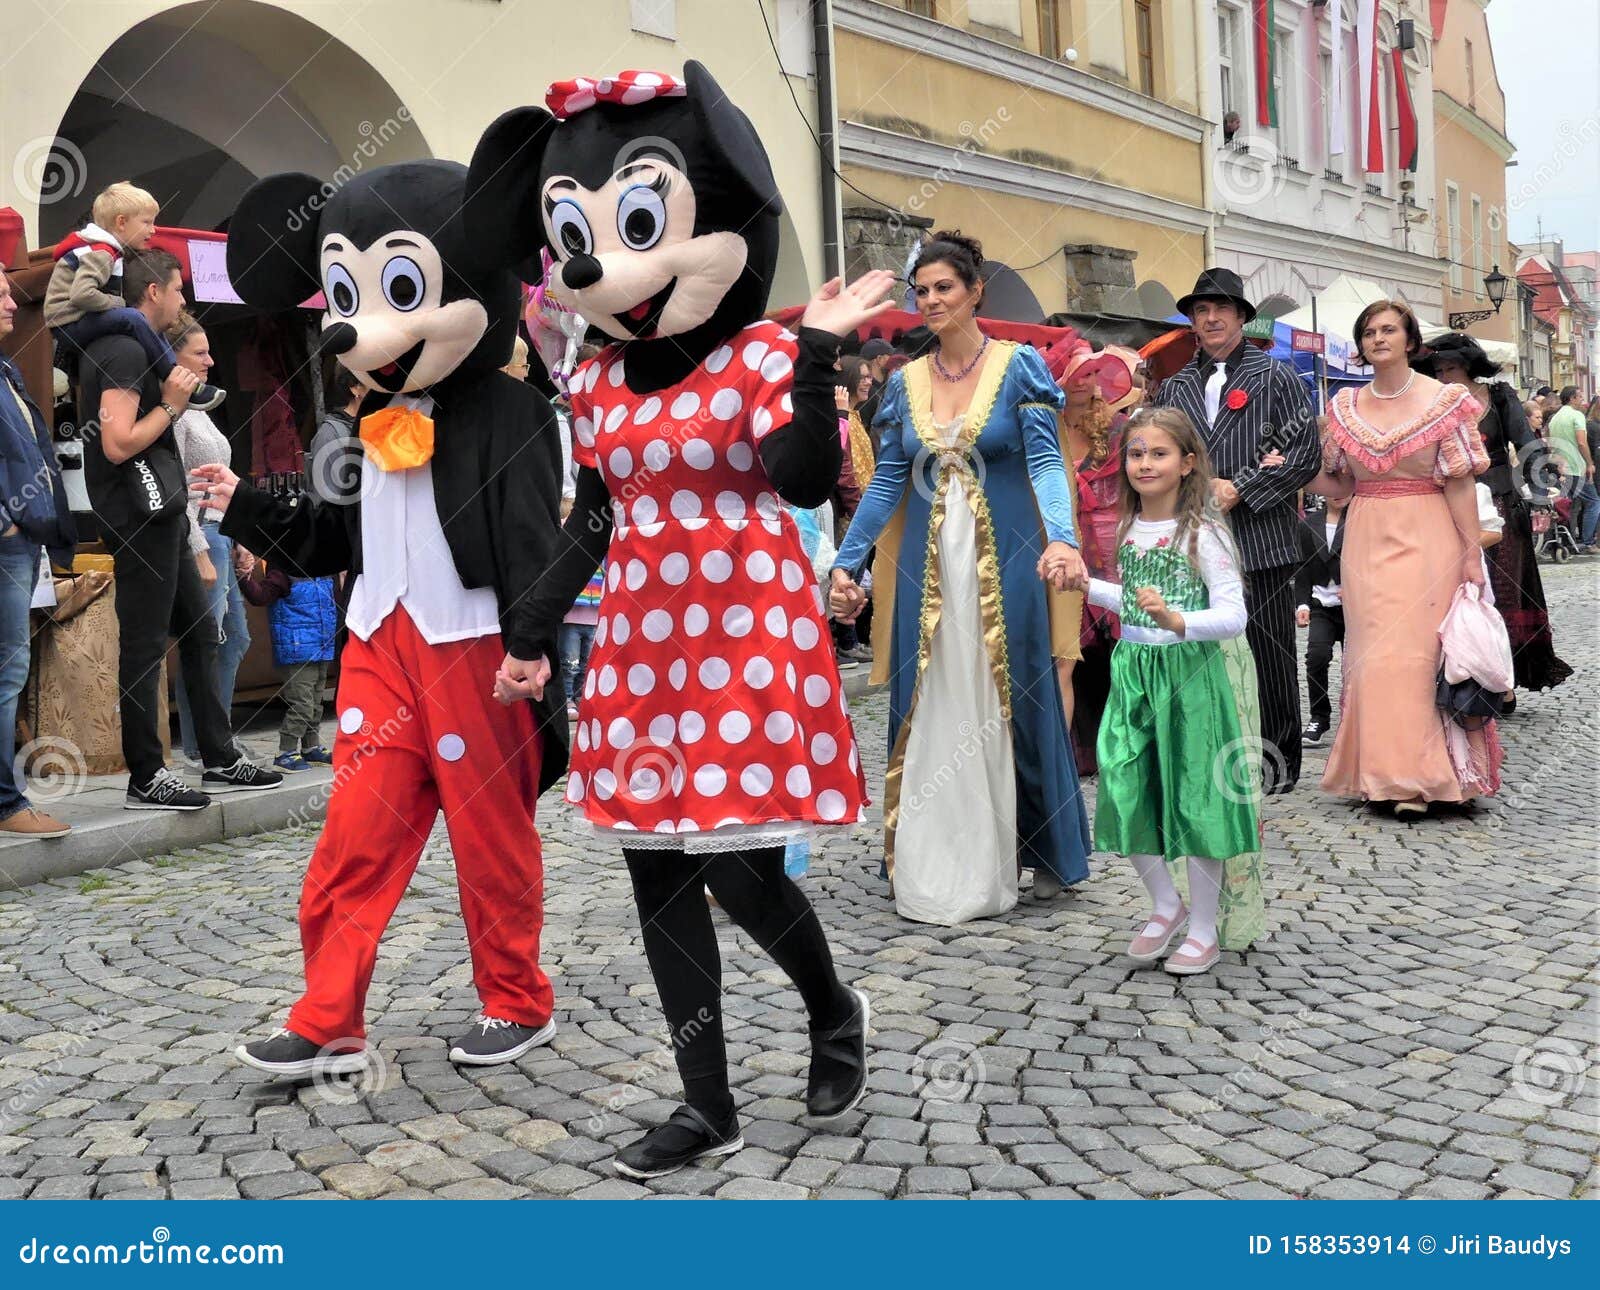 Mickey Mouse Costumes Work at a Parade Editorial Stock - Image of wearing, clowns: 158353914